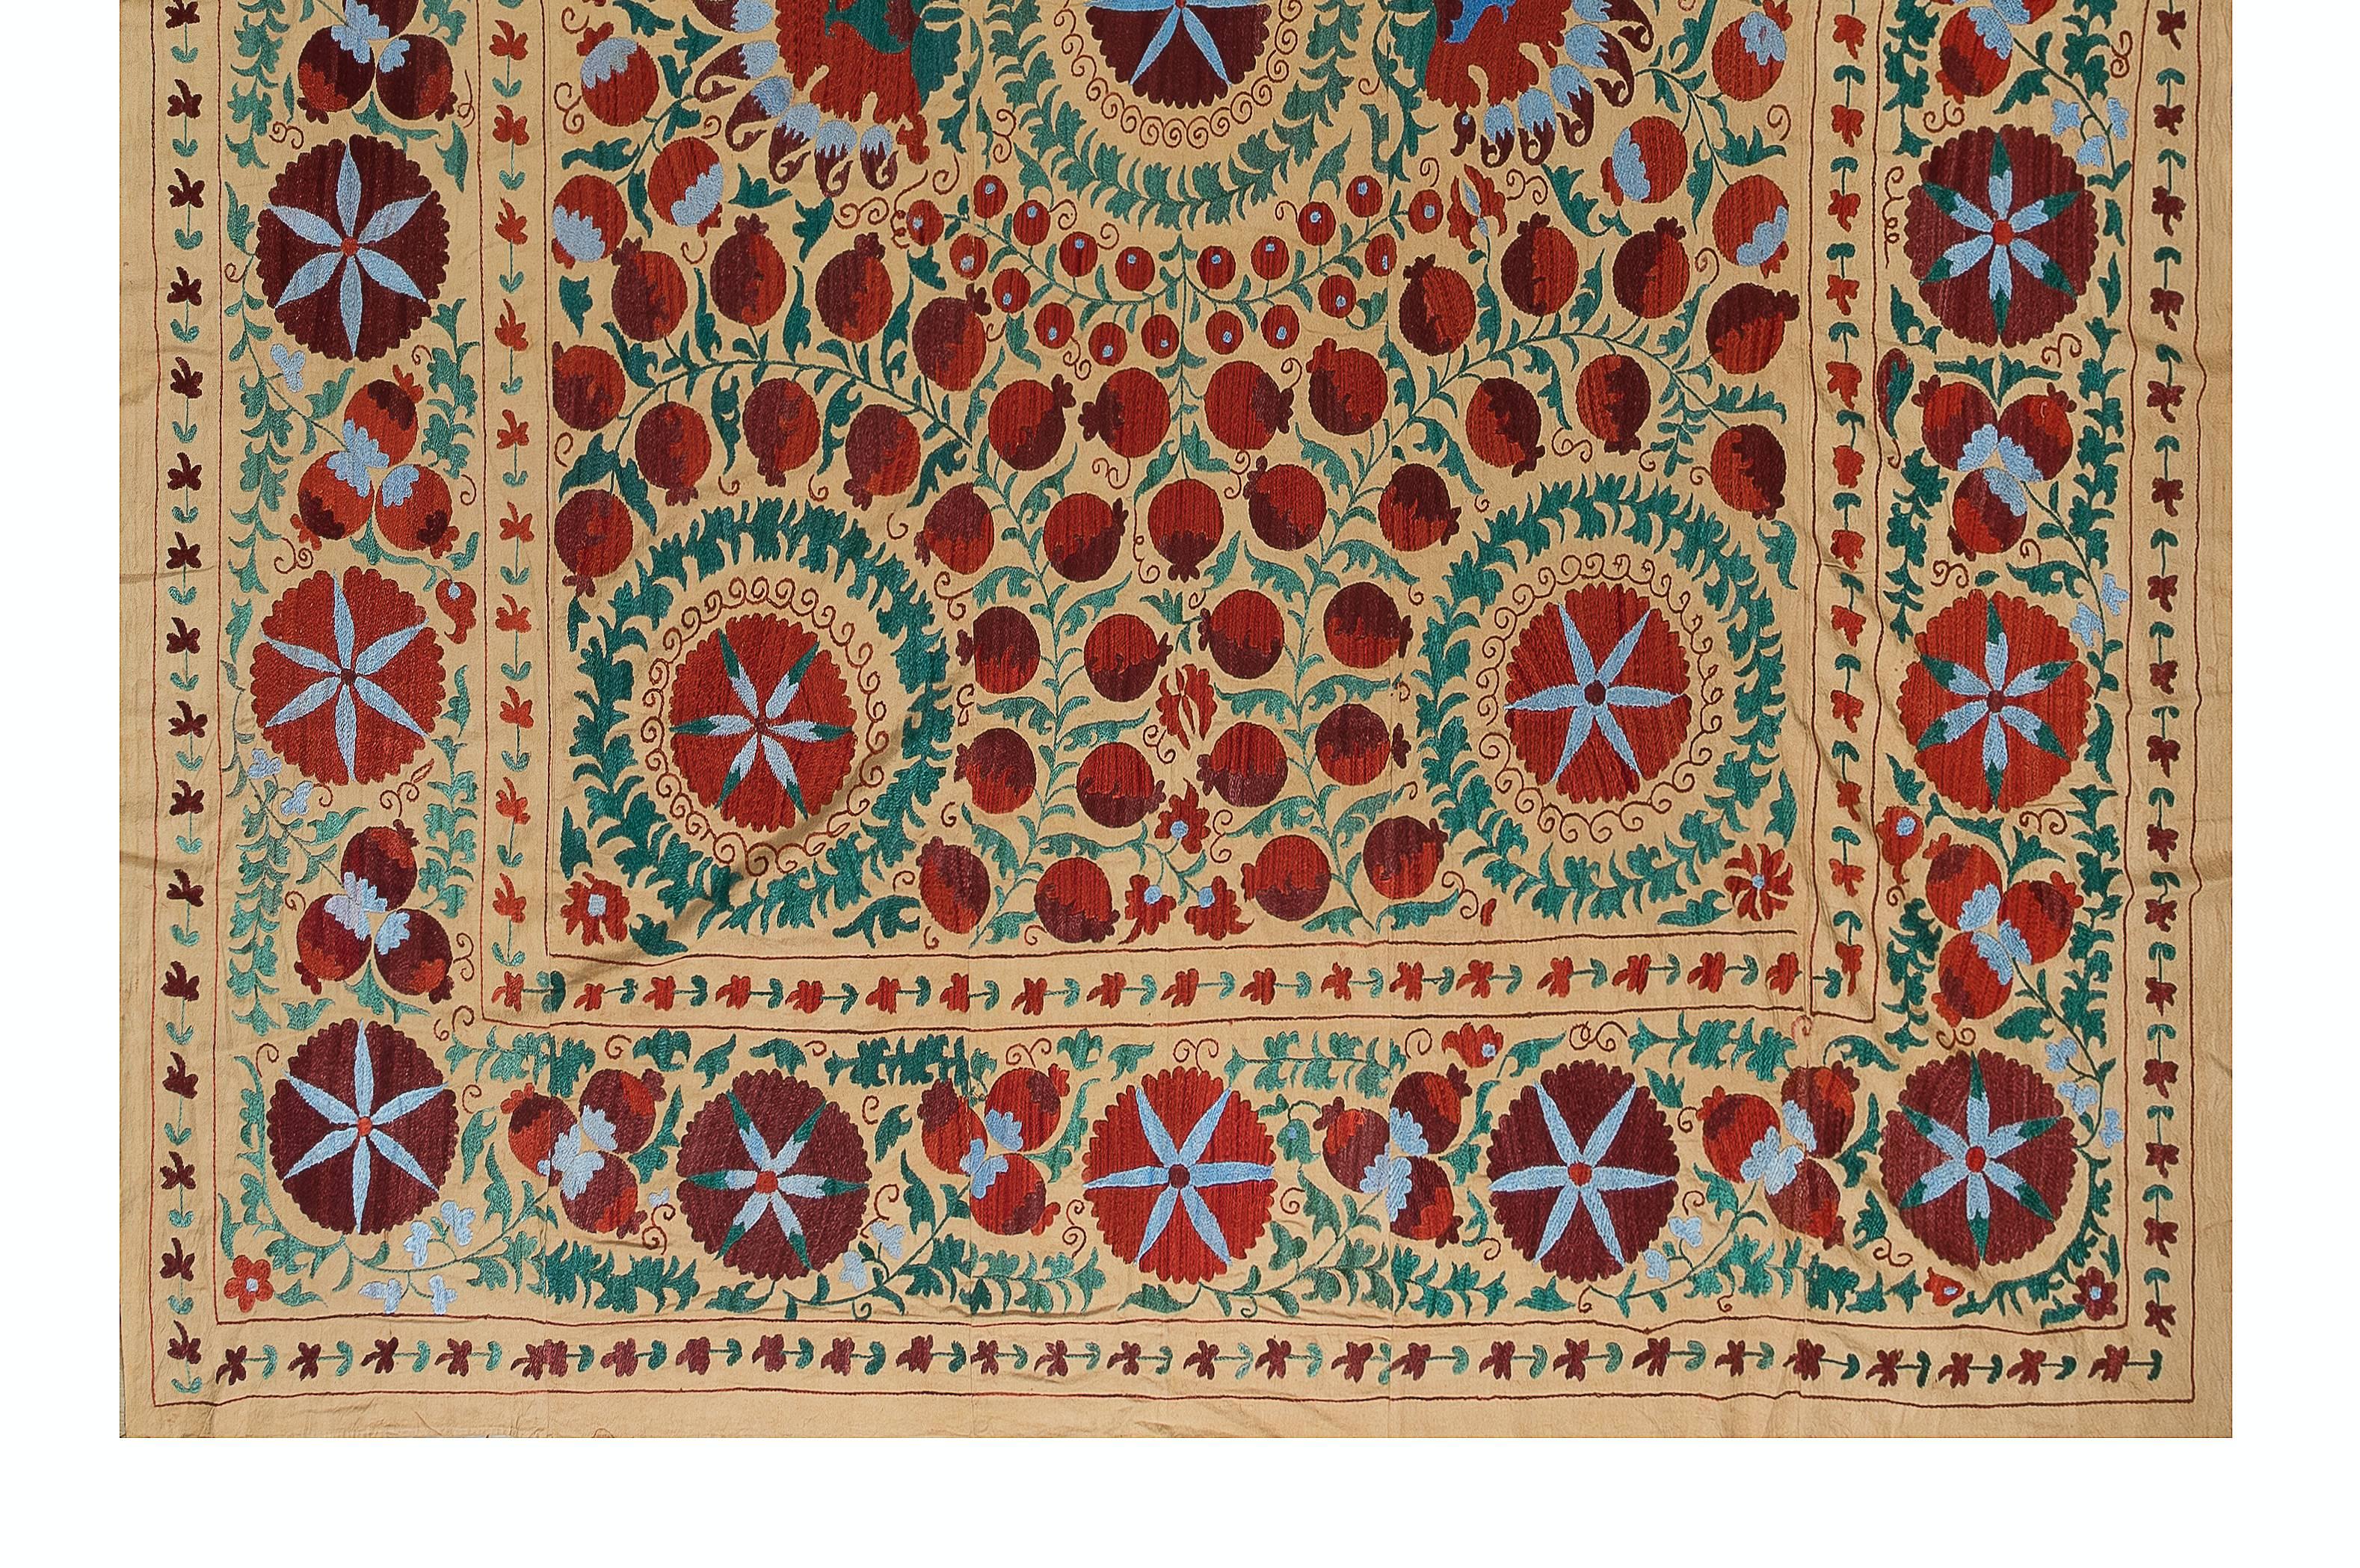 Uzbek 7.6x8.3 Ft Vintage Silk Hand Embroidery Bed Cover, Asian Suzani Wall Hanging For Sale